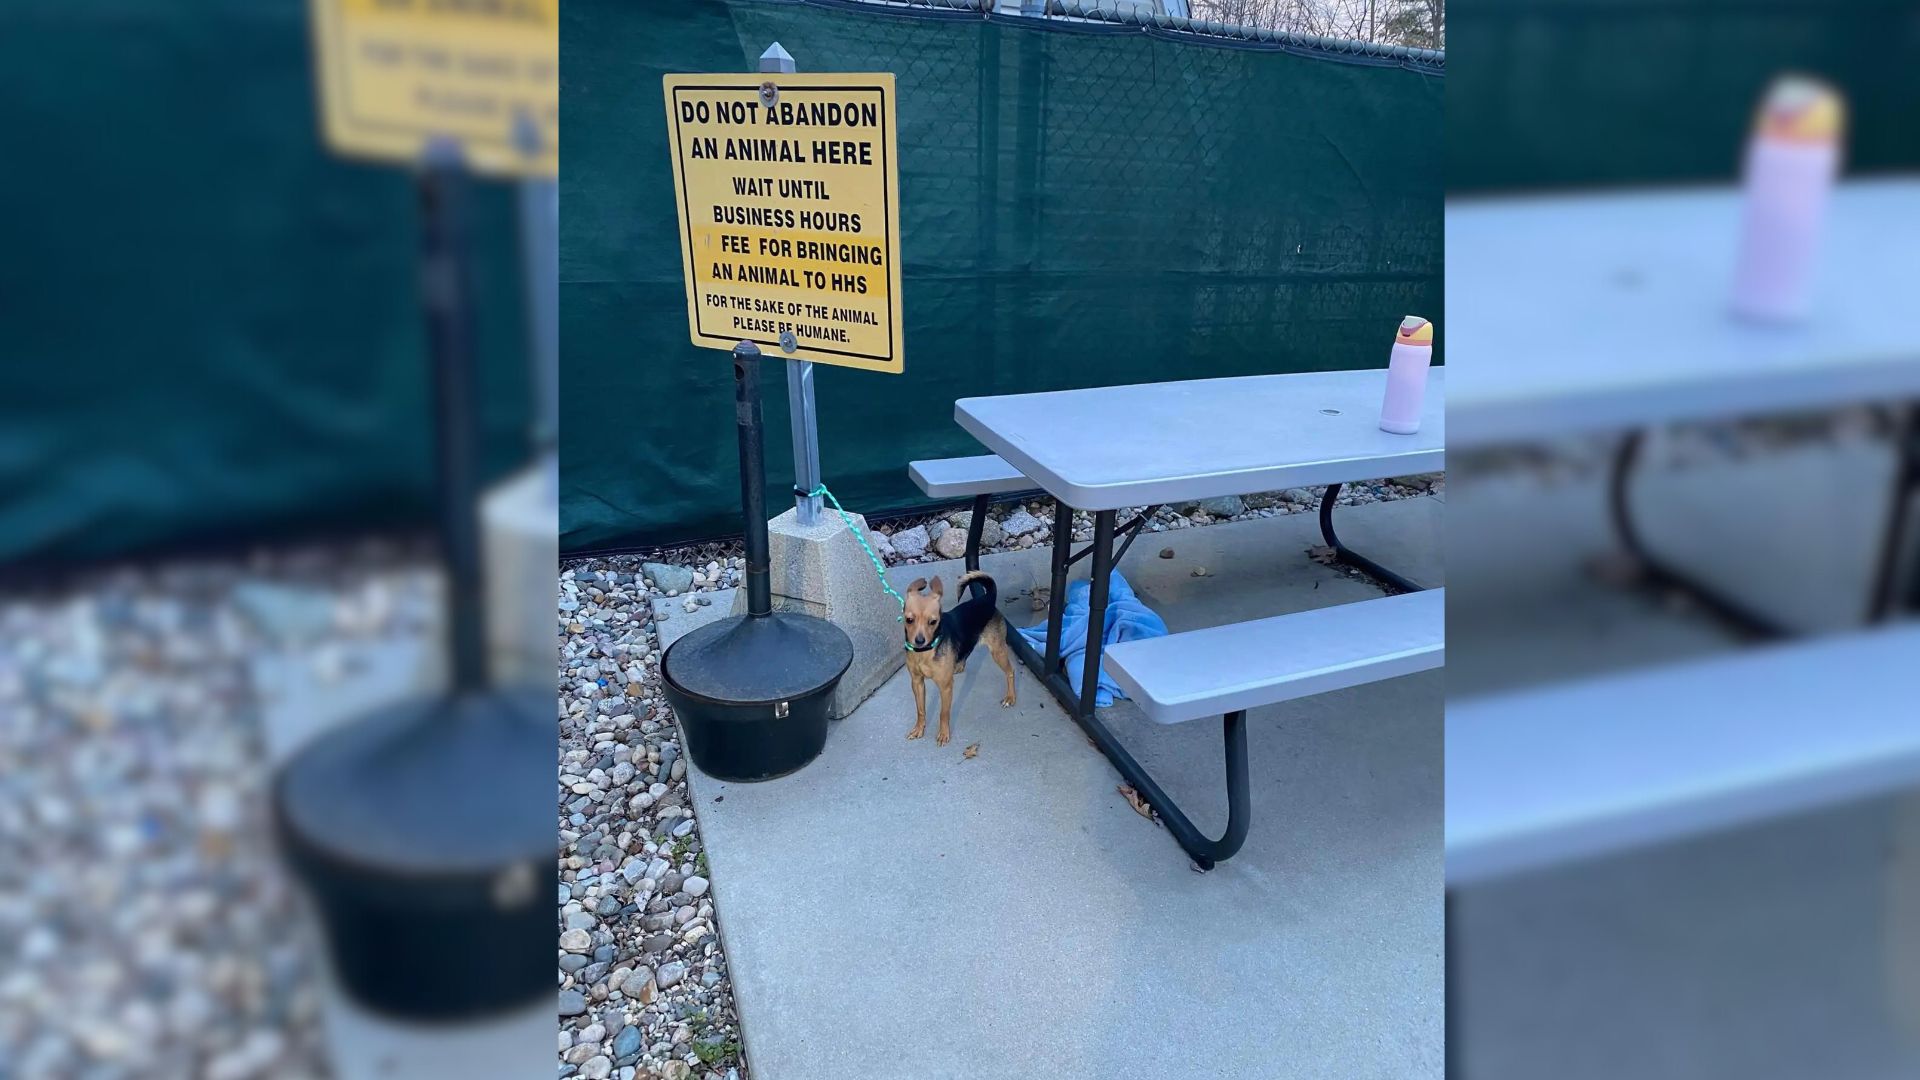 Shelter Worker Discovers A Heartbreaking Surprise Next To Shelter’s ‘Do Not Abandon Animals’ Sign